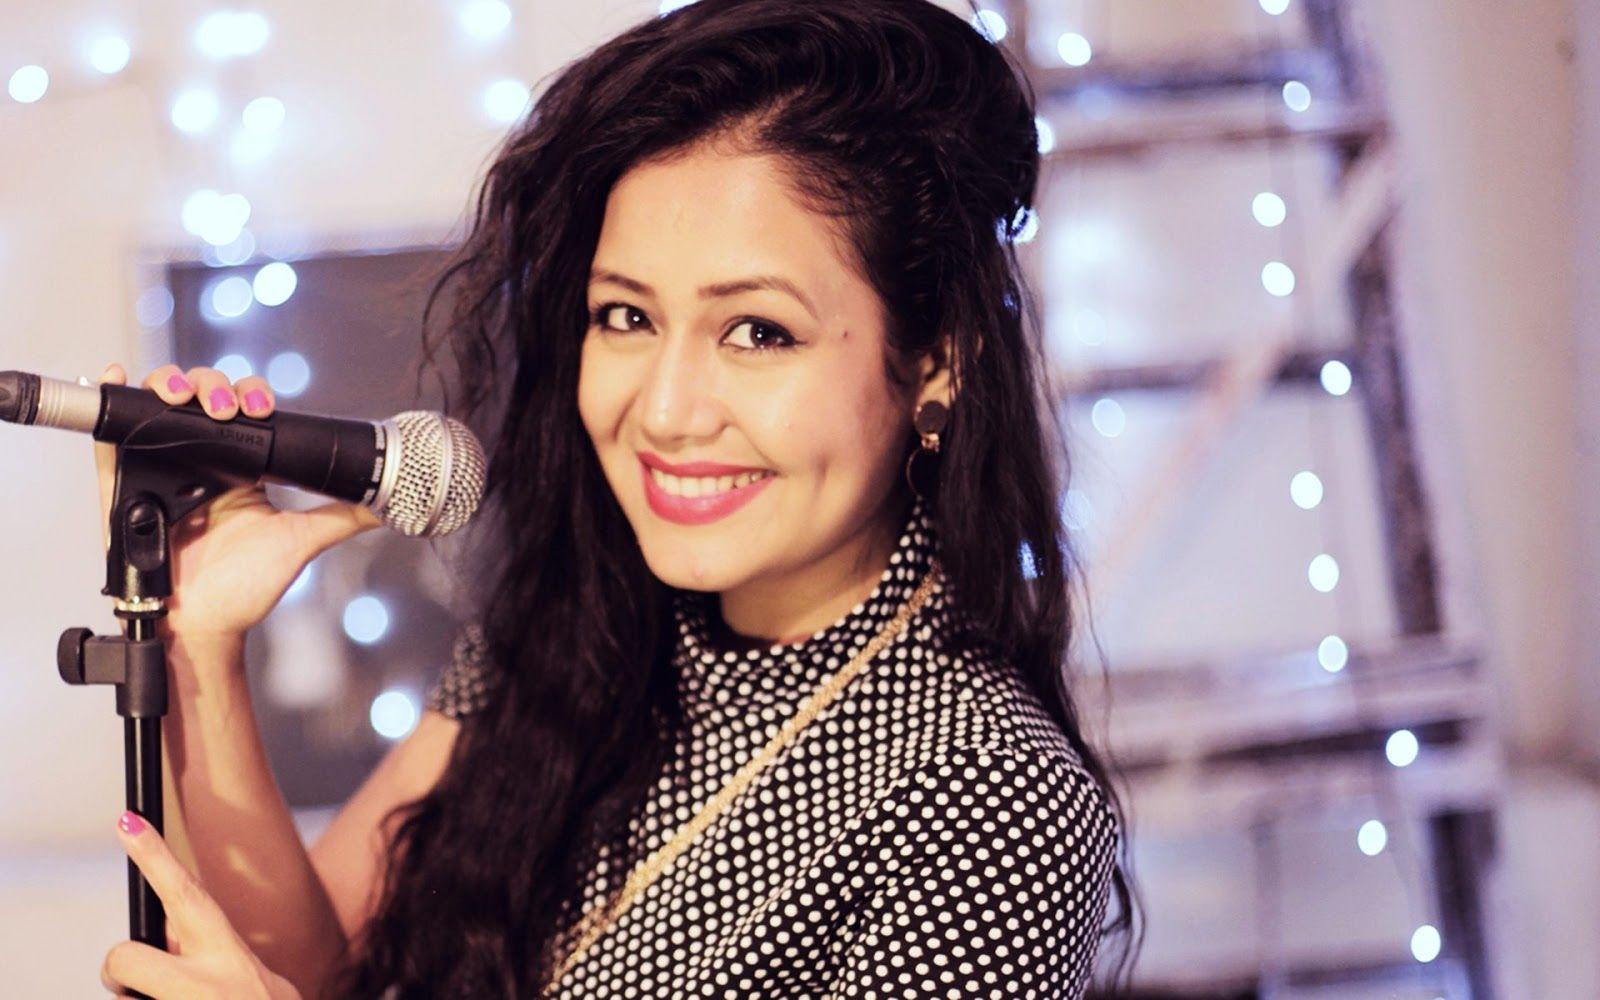 TOP HD WALLPAPER BACKROUND IMAGE FULL HD PICTURES AND PHOTOS ARE FREE DAWONLOD: 52 Neha kakkar Beautiful HD Picture Photo And Pics Download